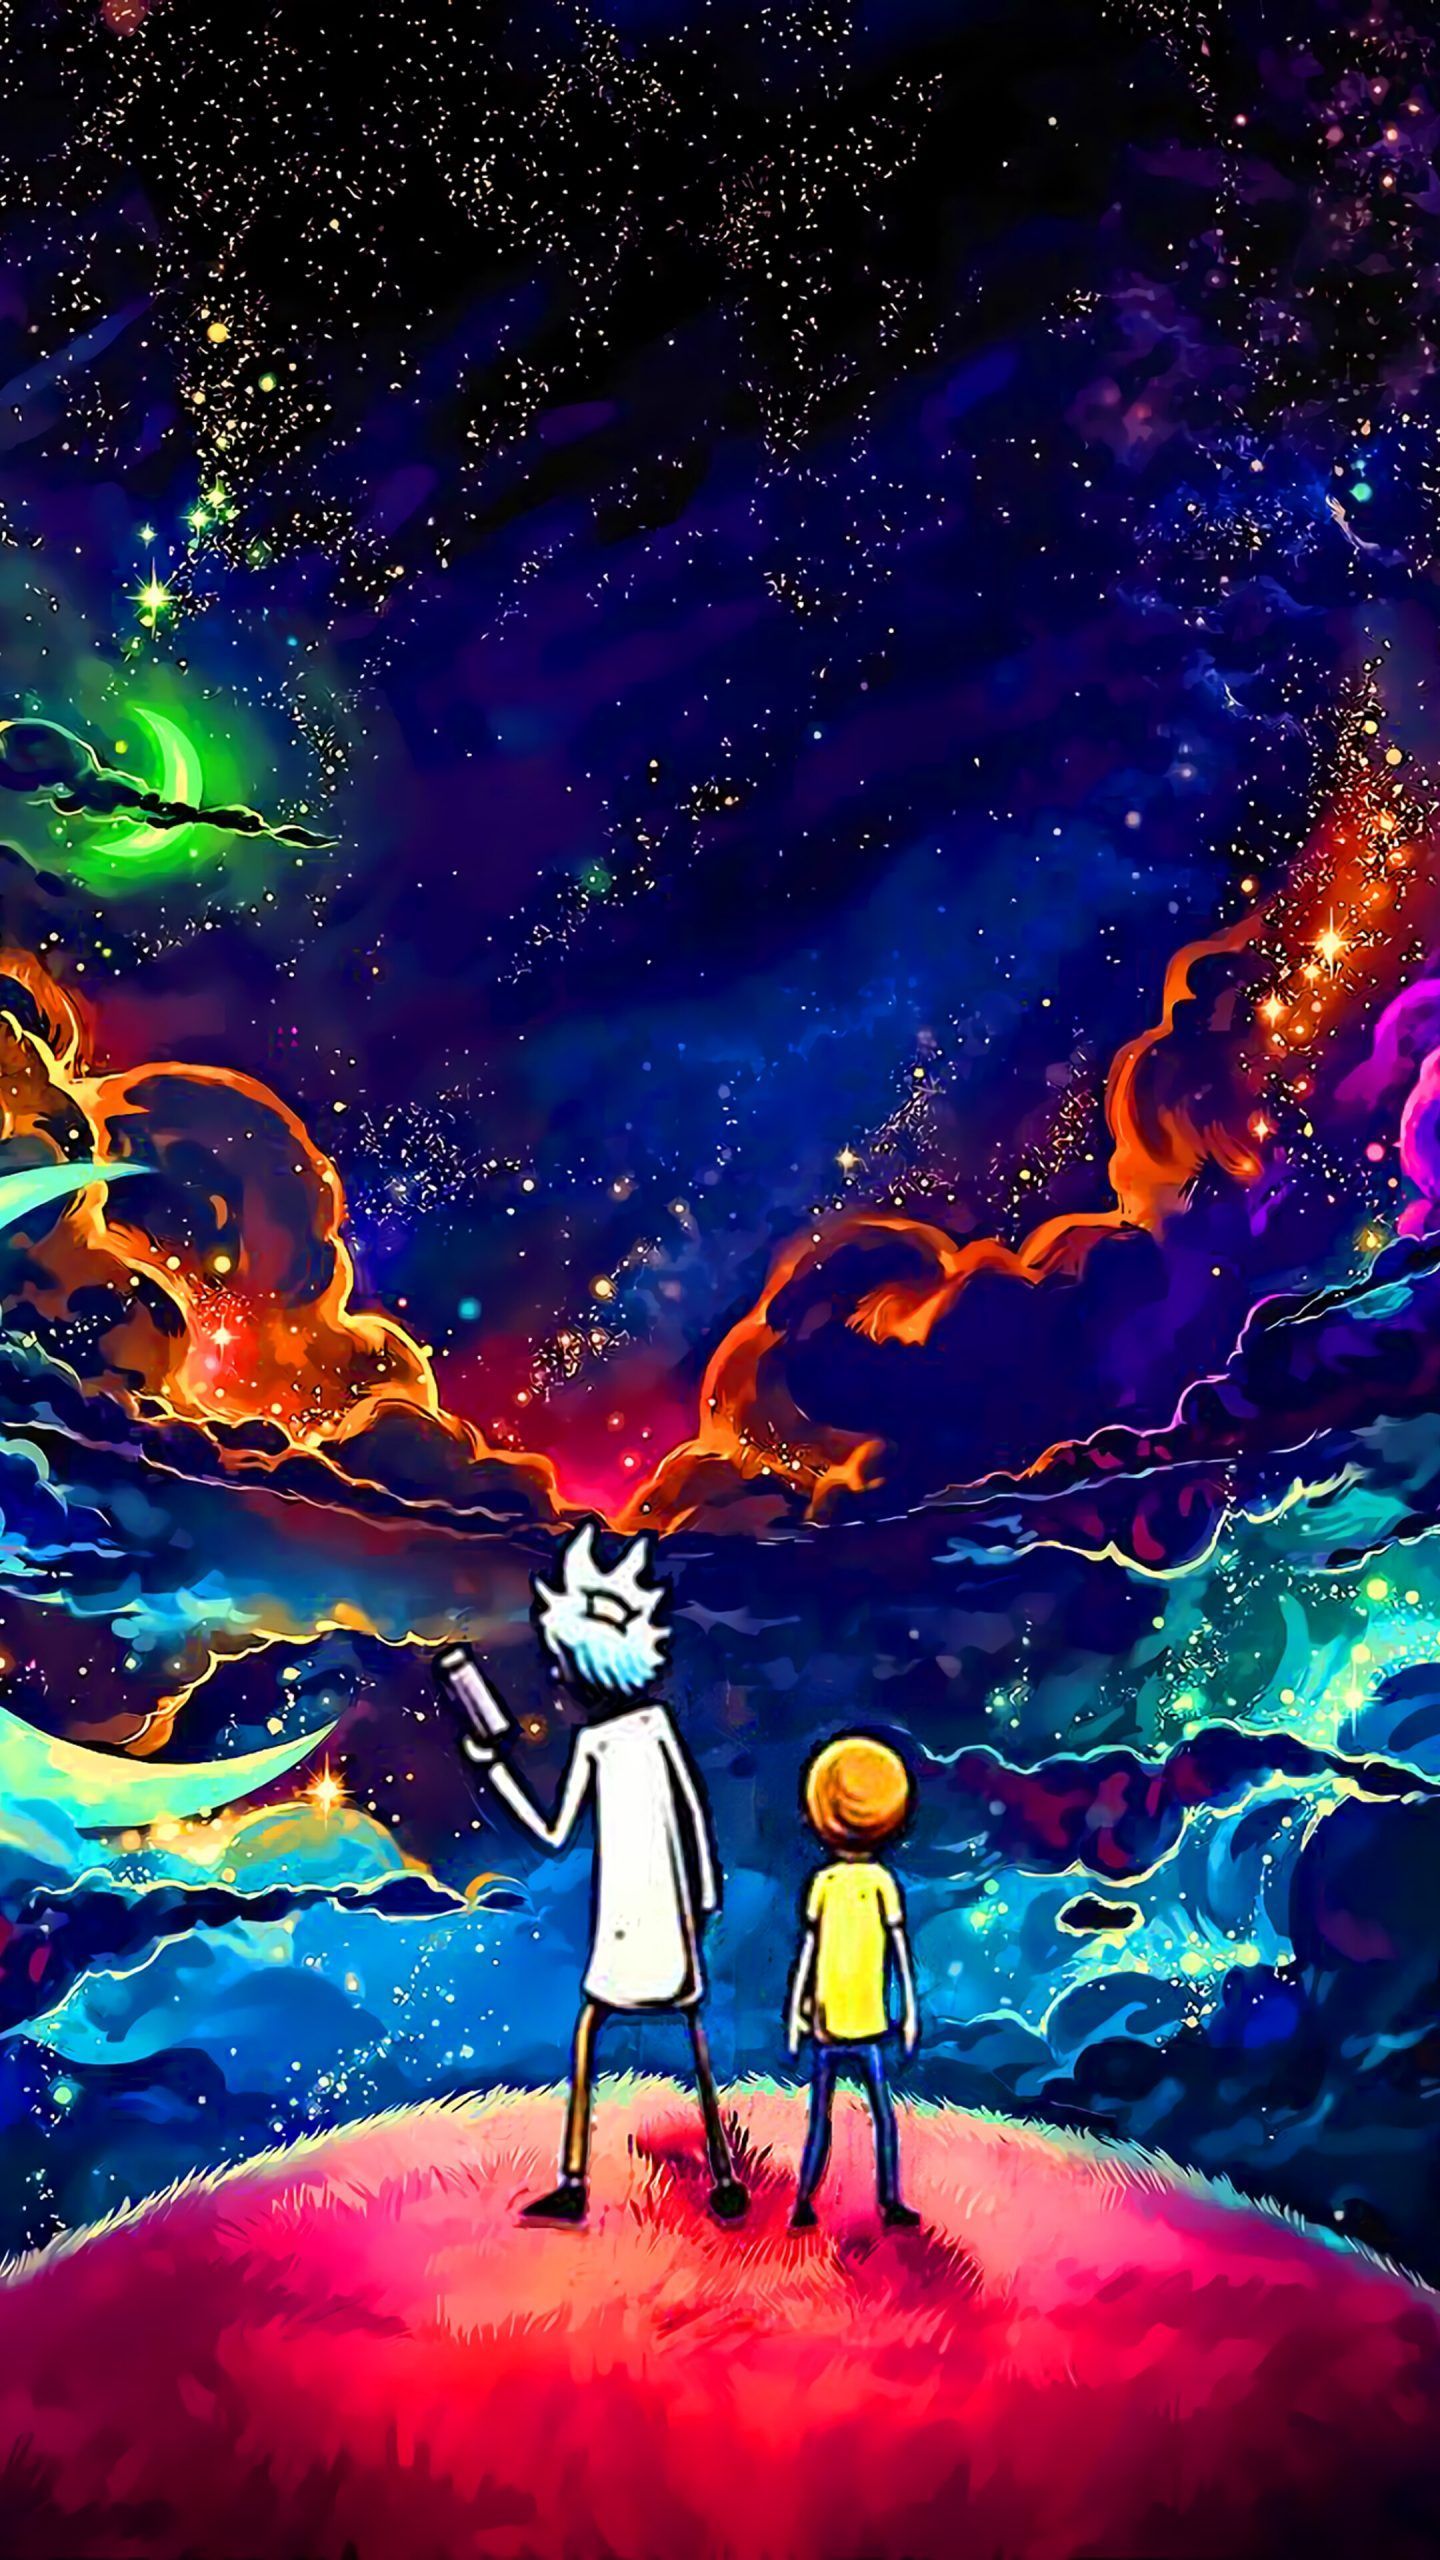 Rick And Morty Sky Stars 4k Wallpaper 5118 with regard to Rick And Morty Wallpaper Portrait. Galaxy wallpaper, Man and dog, Planets wallpaper